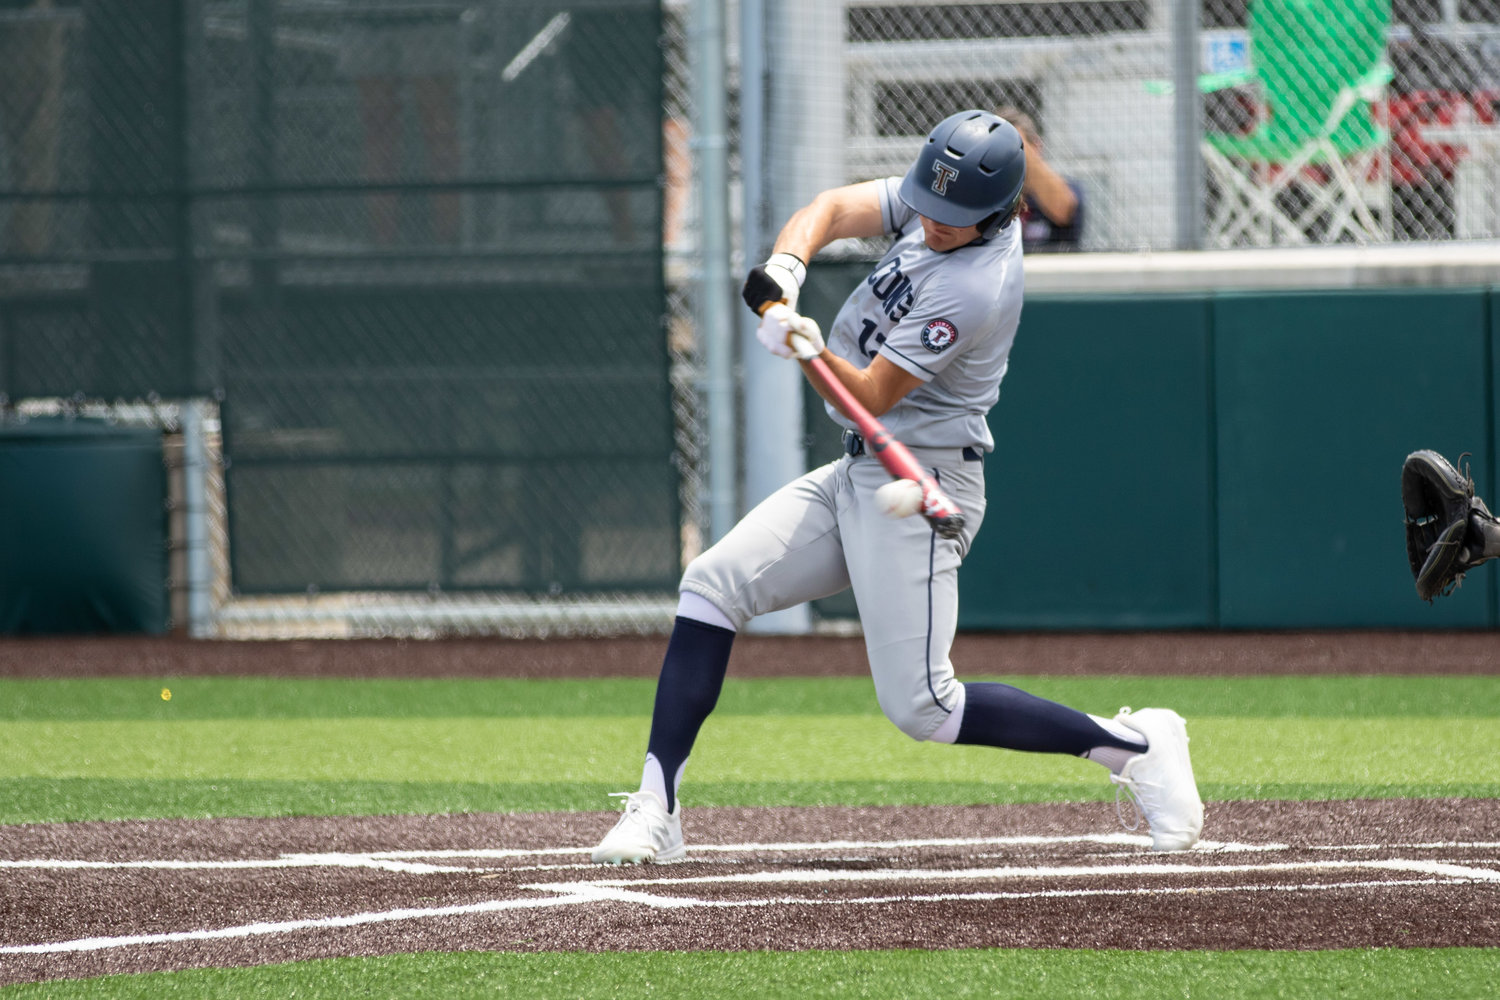 Tompkins senior Jace Laviolette takes a swing during Game 3 of the Falcons’ Region III-6A semifinals against Strake Jesuit last year at Cy-Falls High.